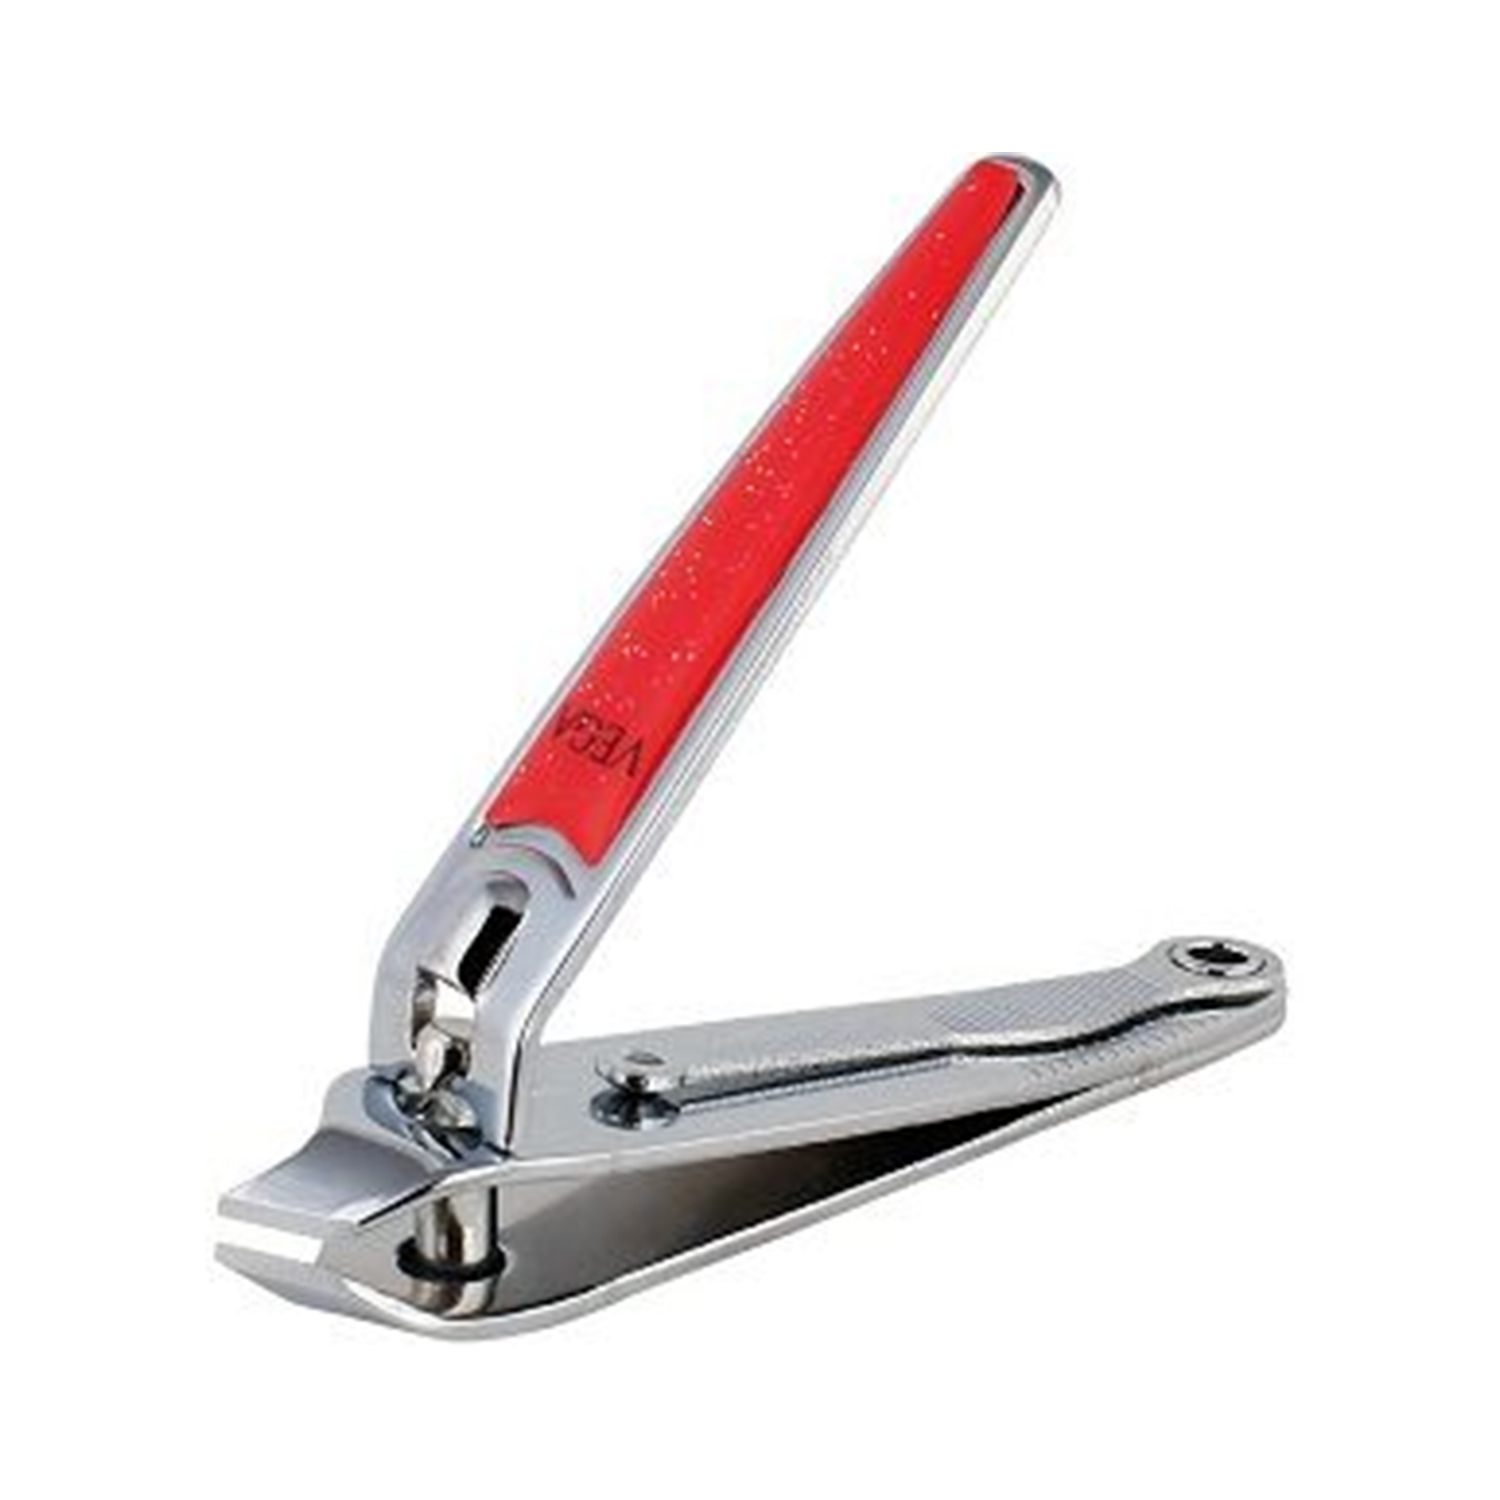 Buy HP HIGH PROFILE Cuticle Cutter For Nails Pedicure Tools, Nail Cutter  Clippers For Thick Nails - Pack of 1 Online at Low Prices in India -  Amazon.in